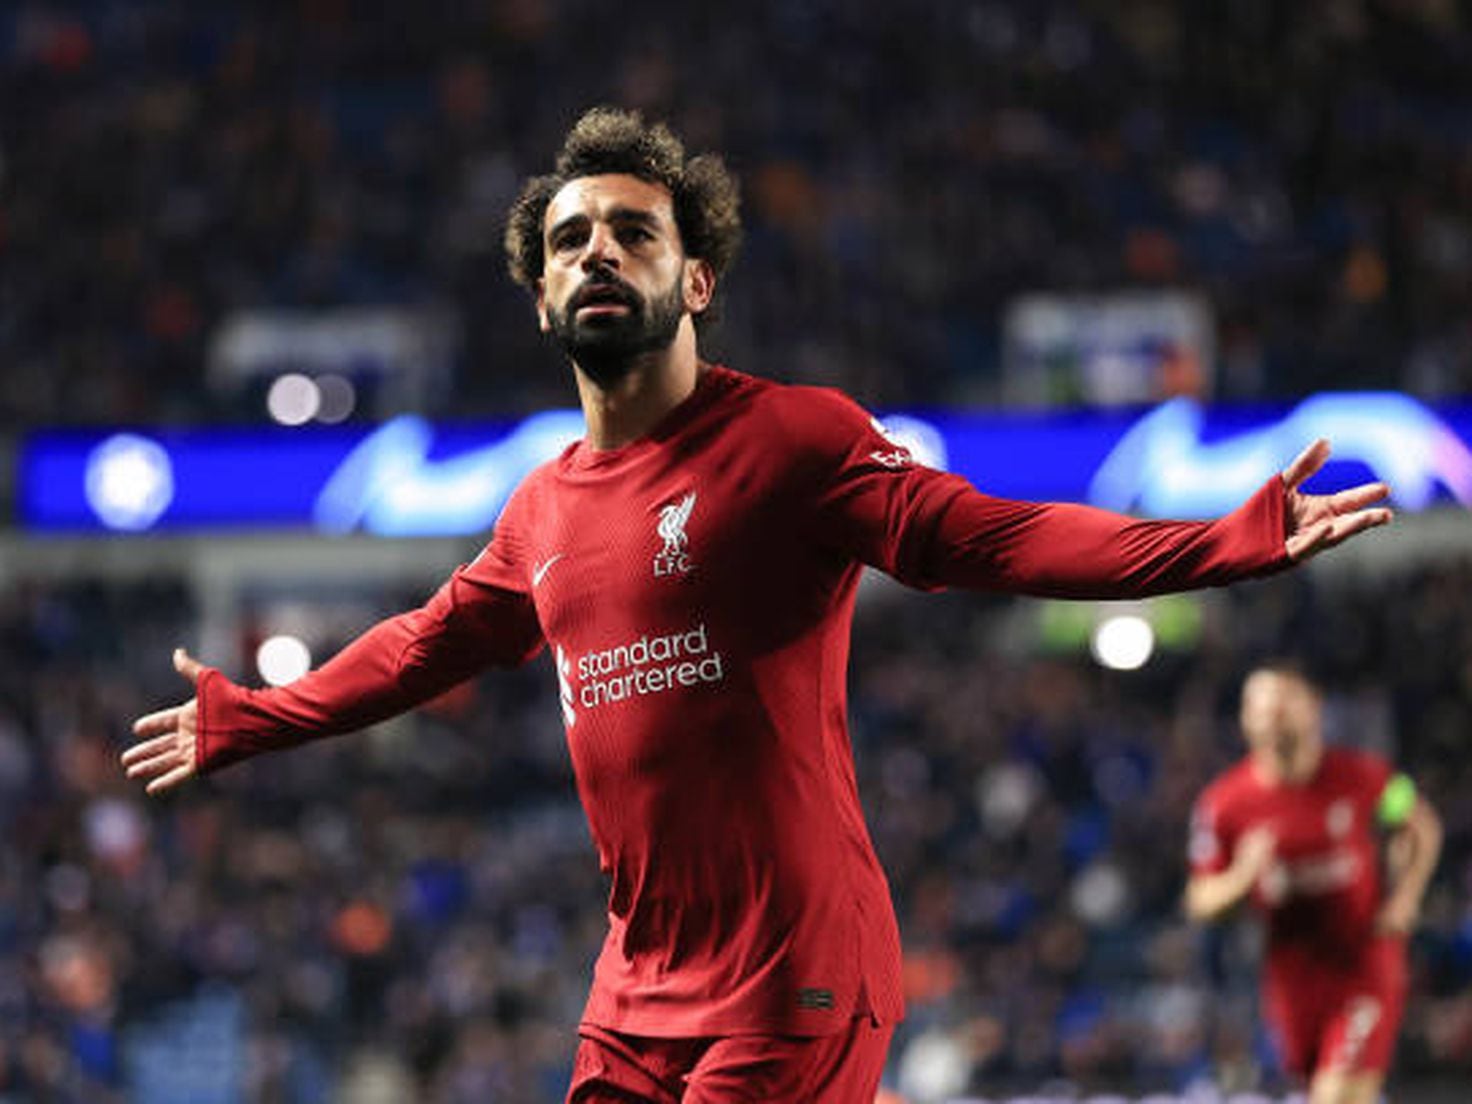 Champions League top scorers after group stages – Salah level with